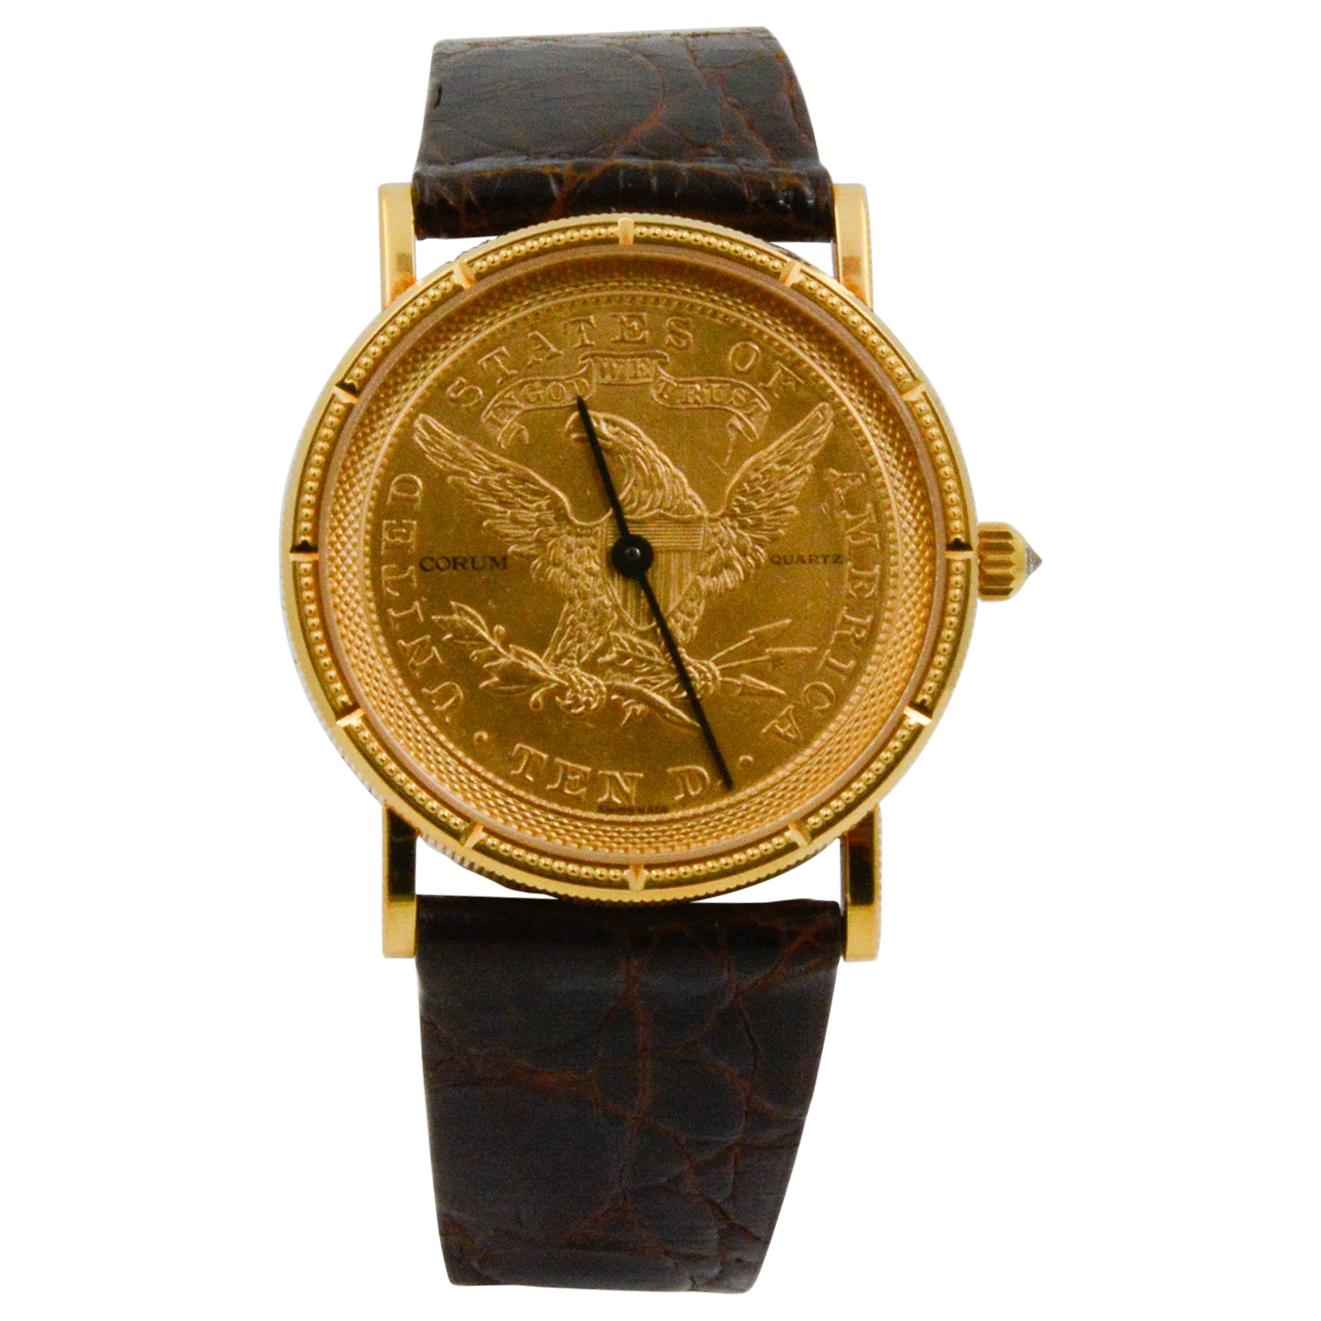 This 18k yellow gold circa 1995 CPO Corum watch features the design of the $10 American coin, dated 1865, the year the Civil War ended. The watch is 36mm with sapphire crystal and quartz movement. It is also paired with a 20mm brown crocodile strap